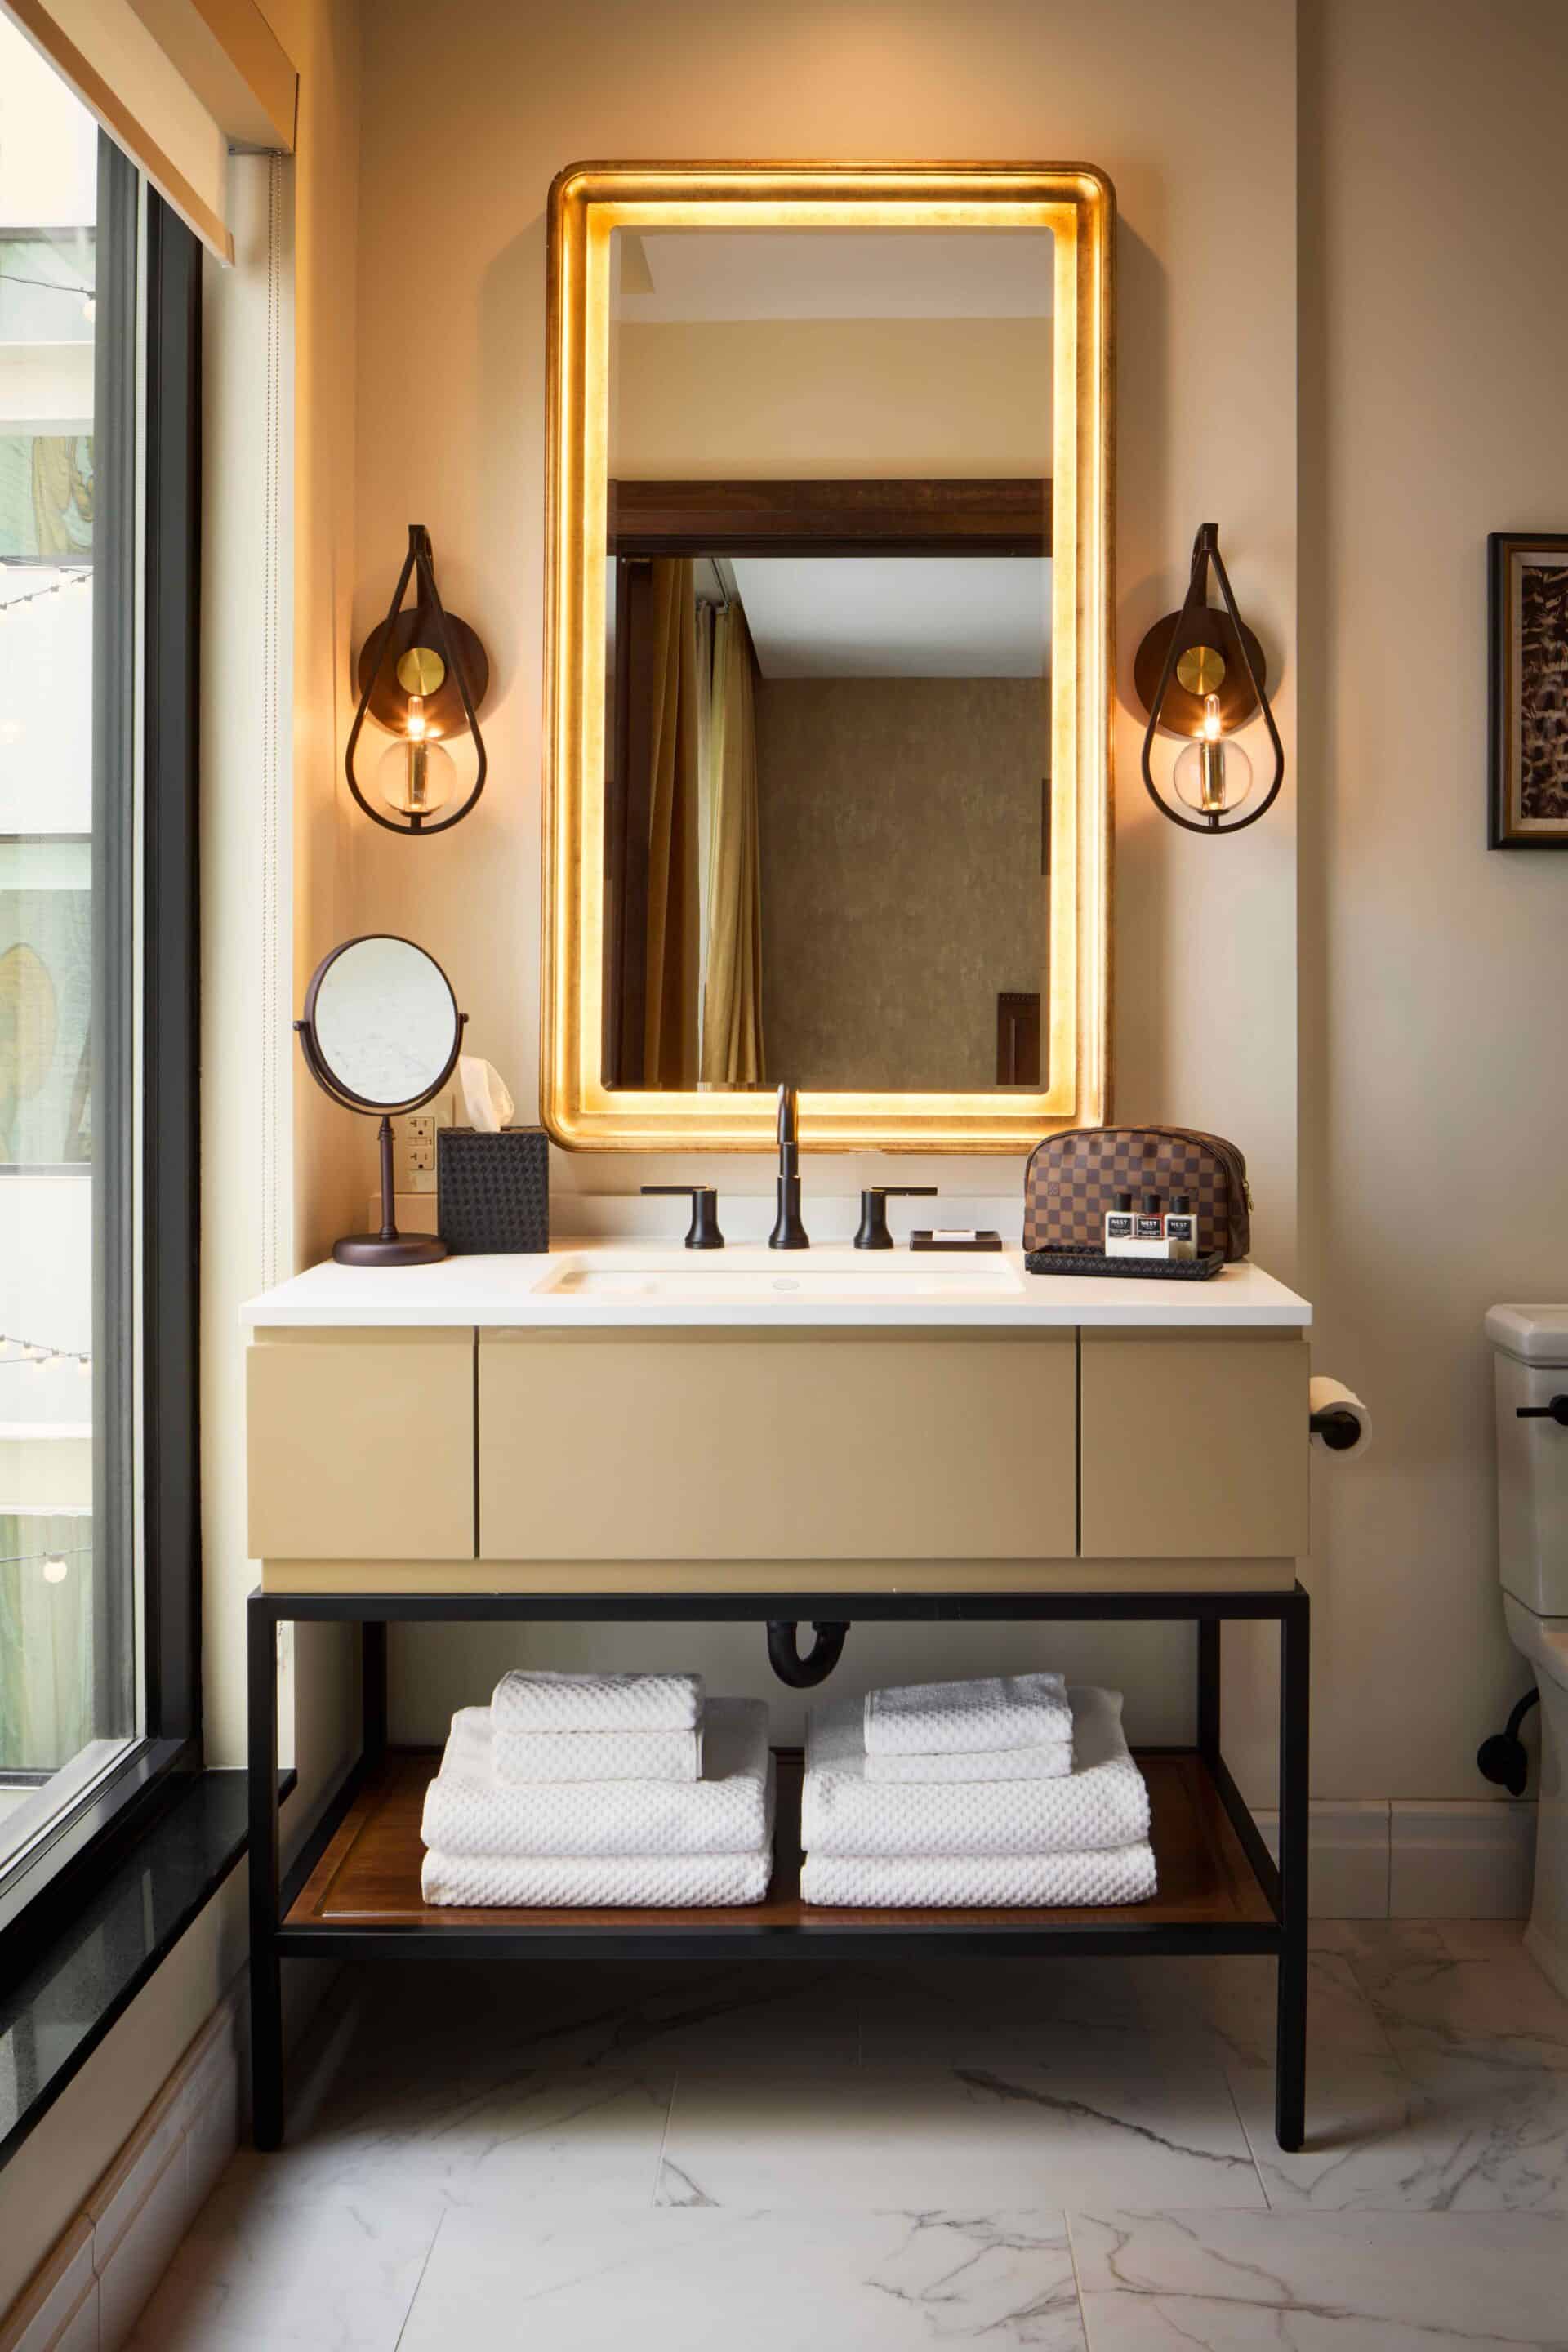 The Peregrine Guest Bathroom Interior Designed by Trivers Architects